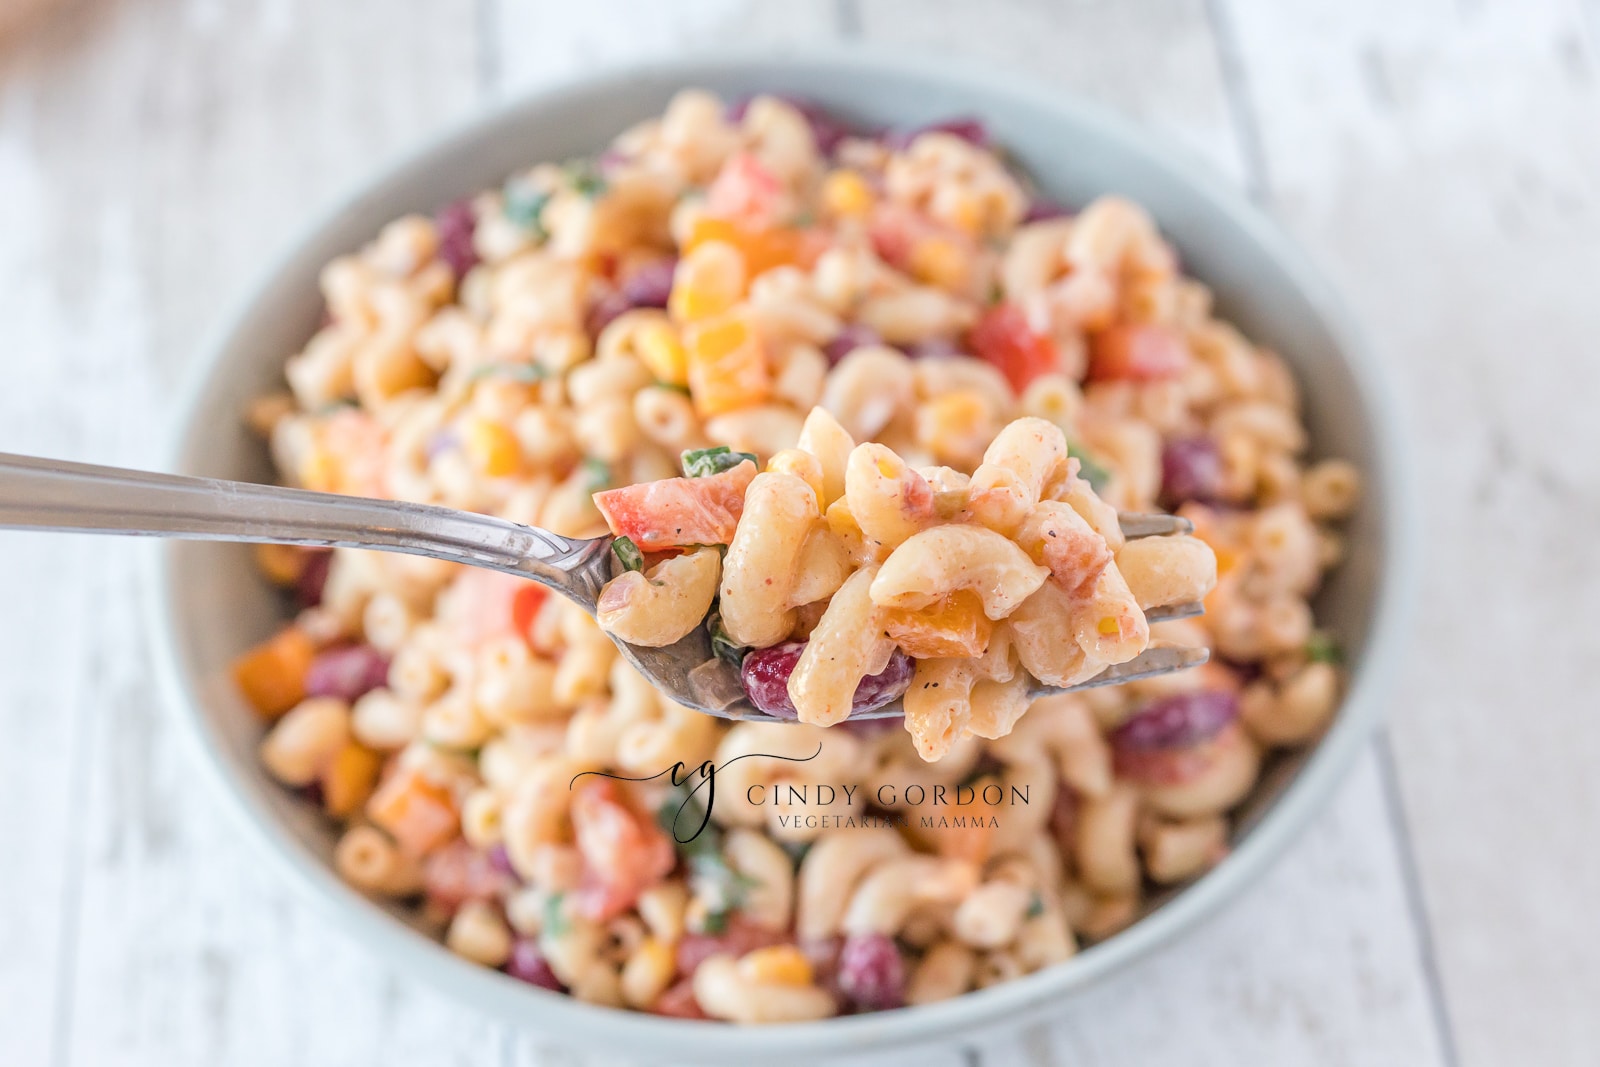 creamy macaroni salad with red, purple and green vegetables in it in a blue bowl